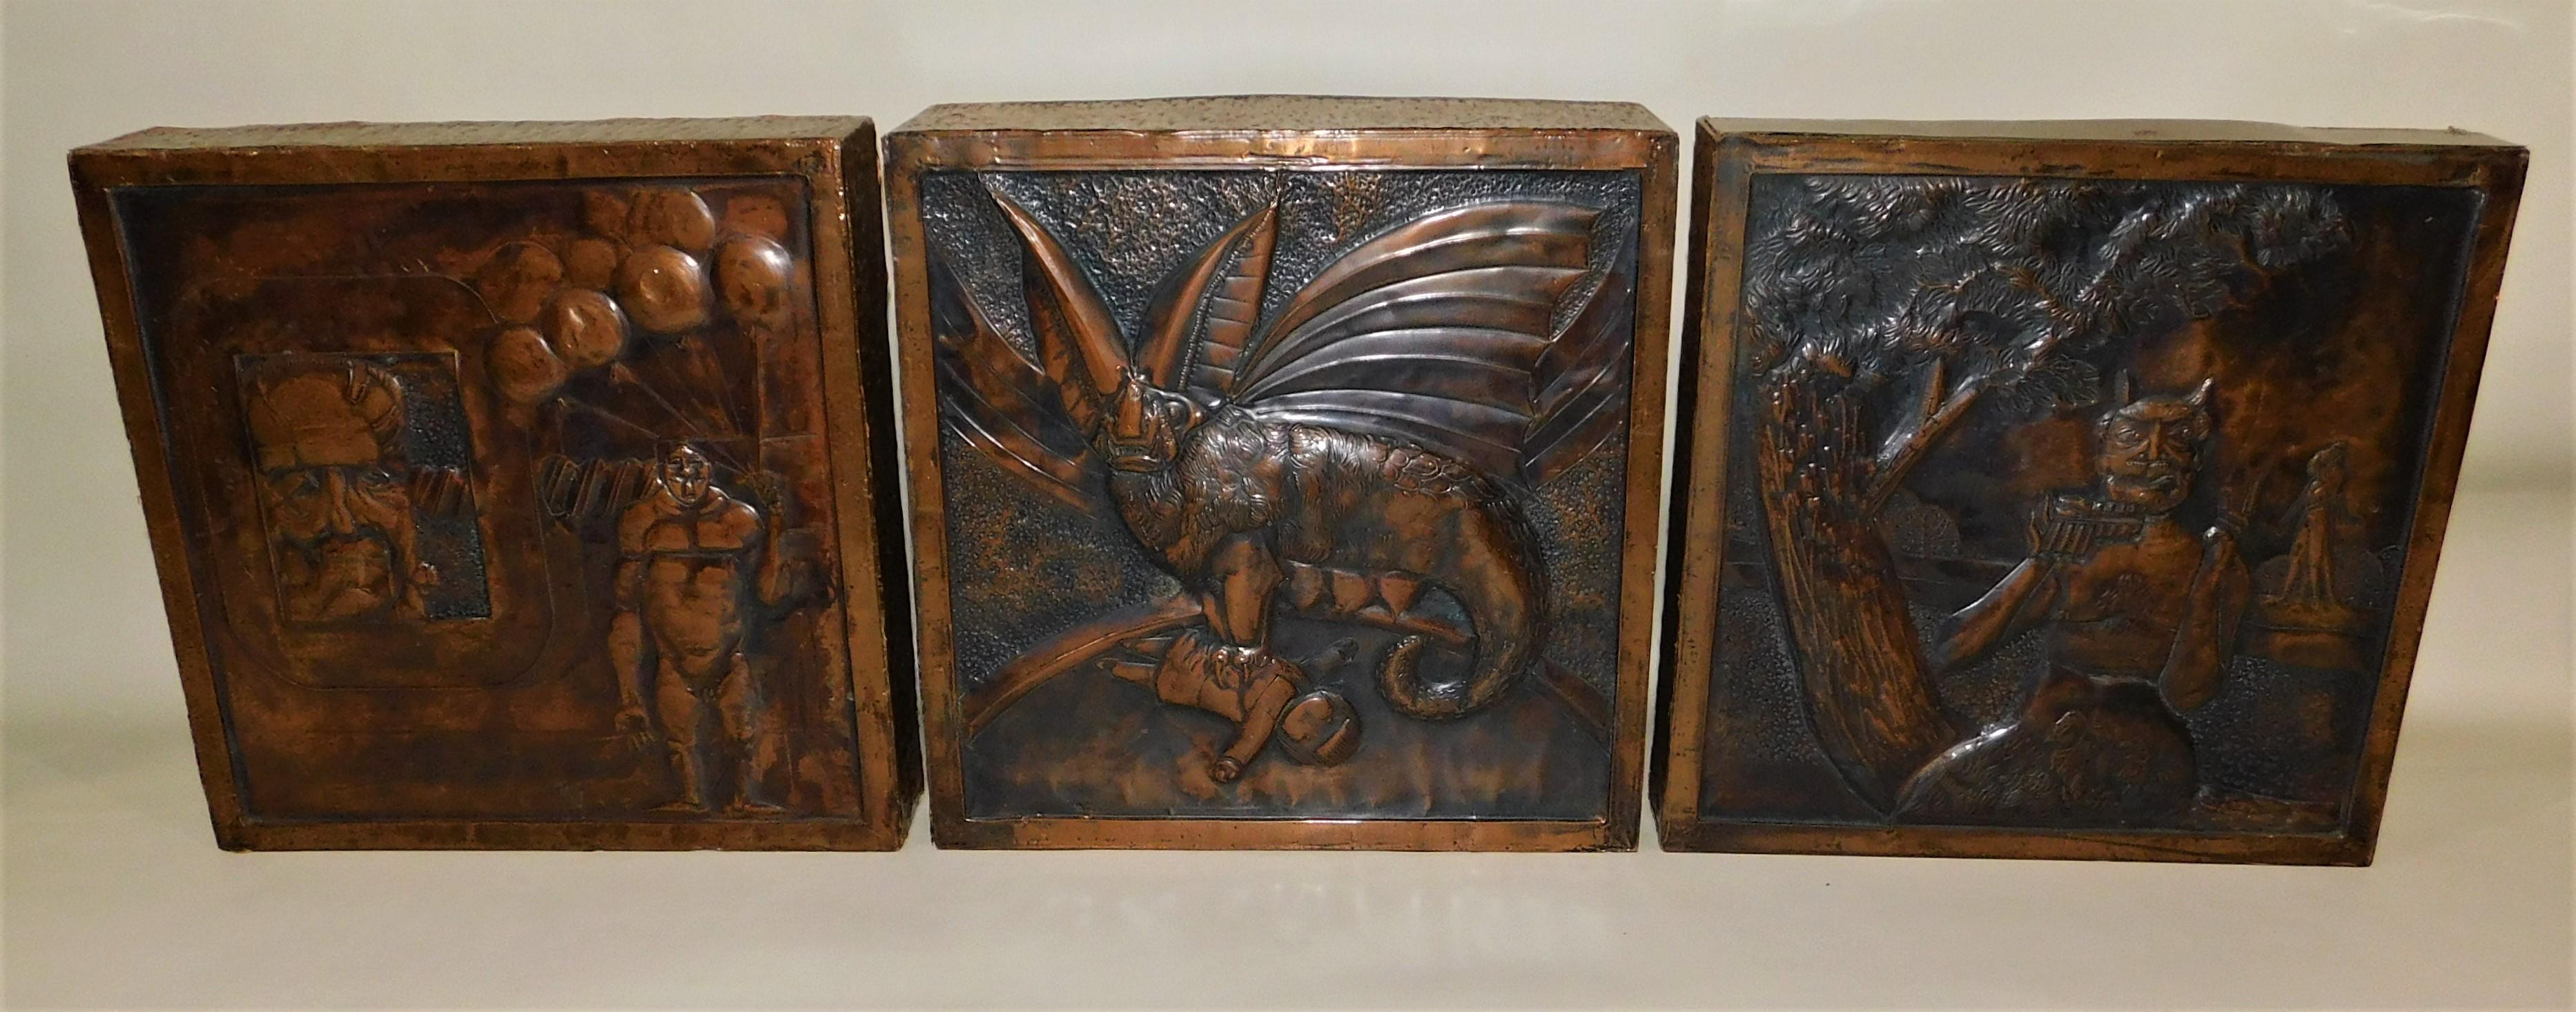 Three original hand-hammered figurative copper metal art work on wood by an unknown artist. Similar to another piece we have listed by copper-muralist artist Laszlo Buday but cannot confirm he did these pieces they are not signed.
Pan playing a